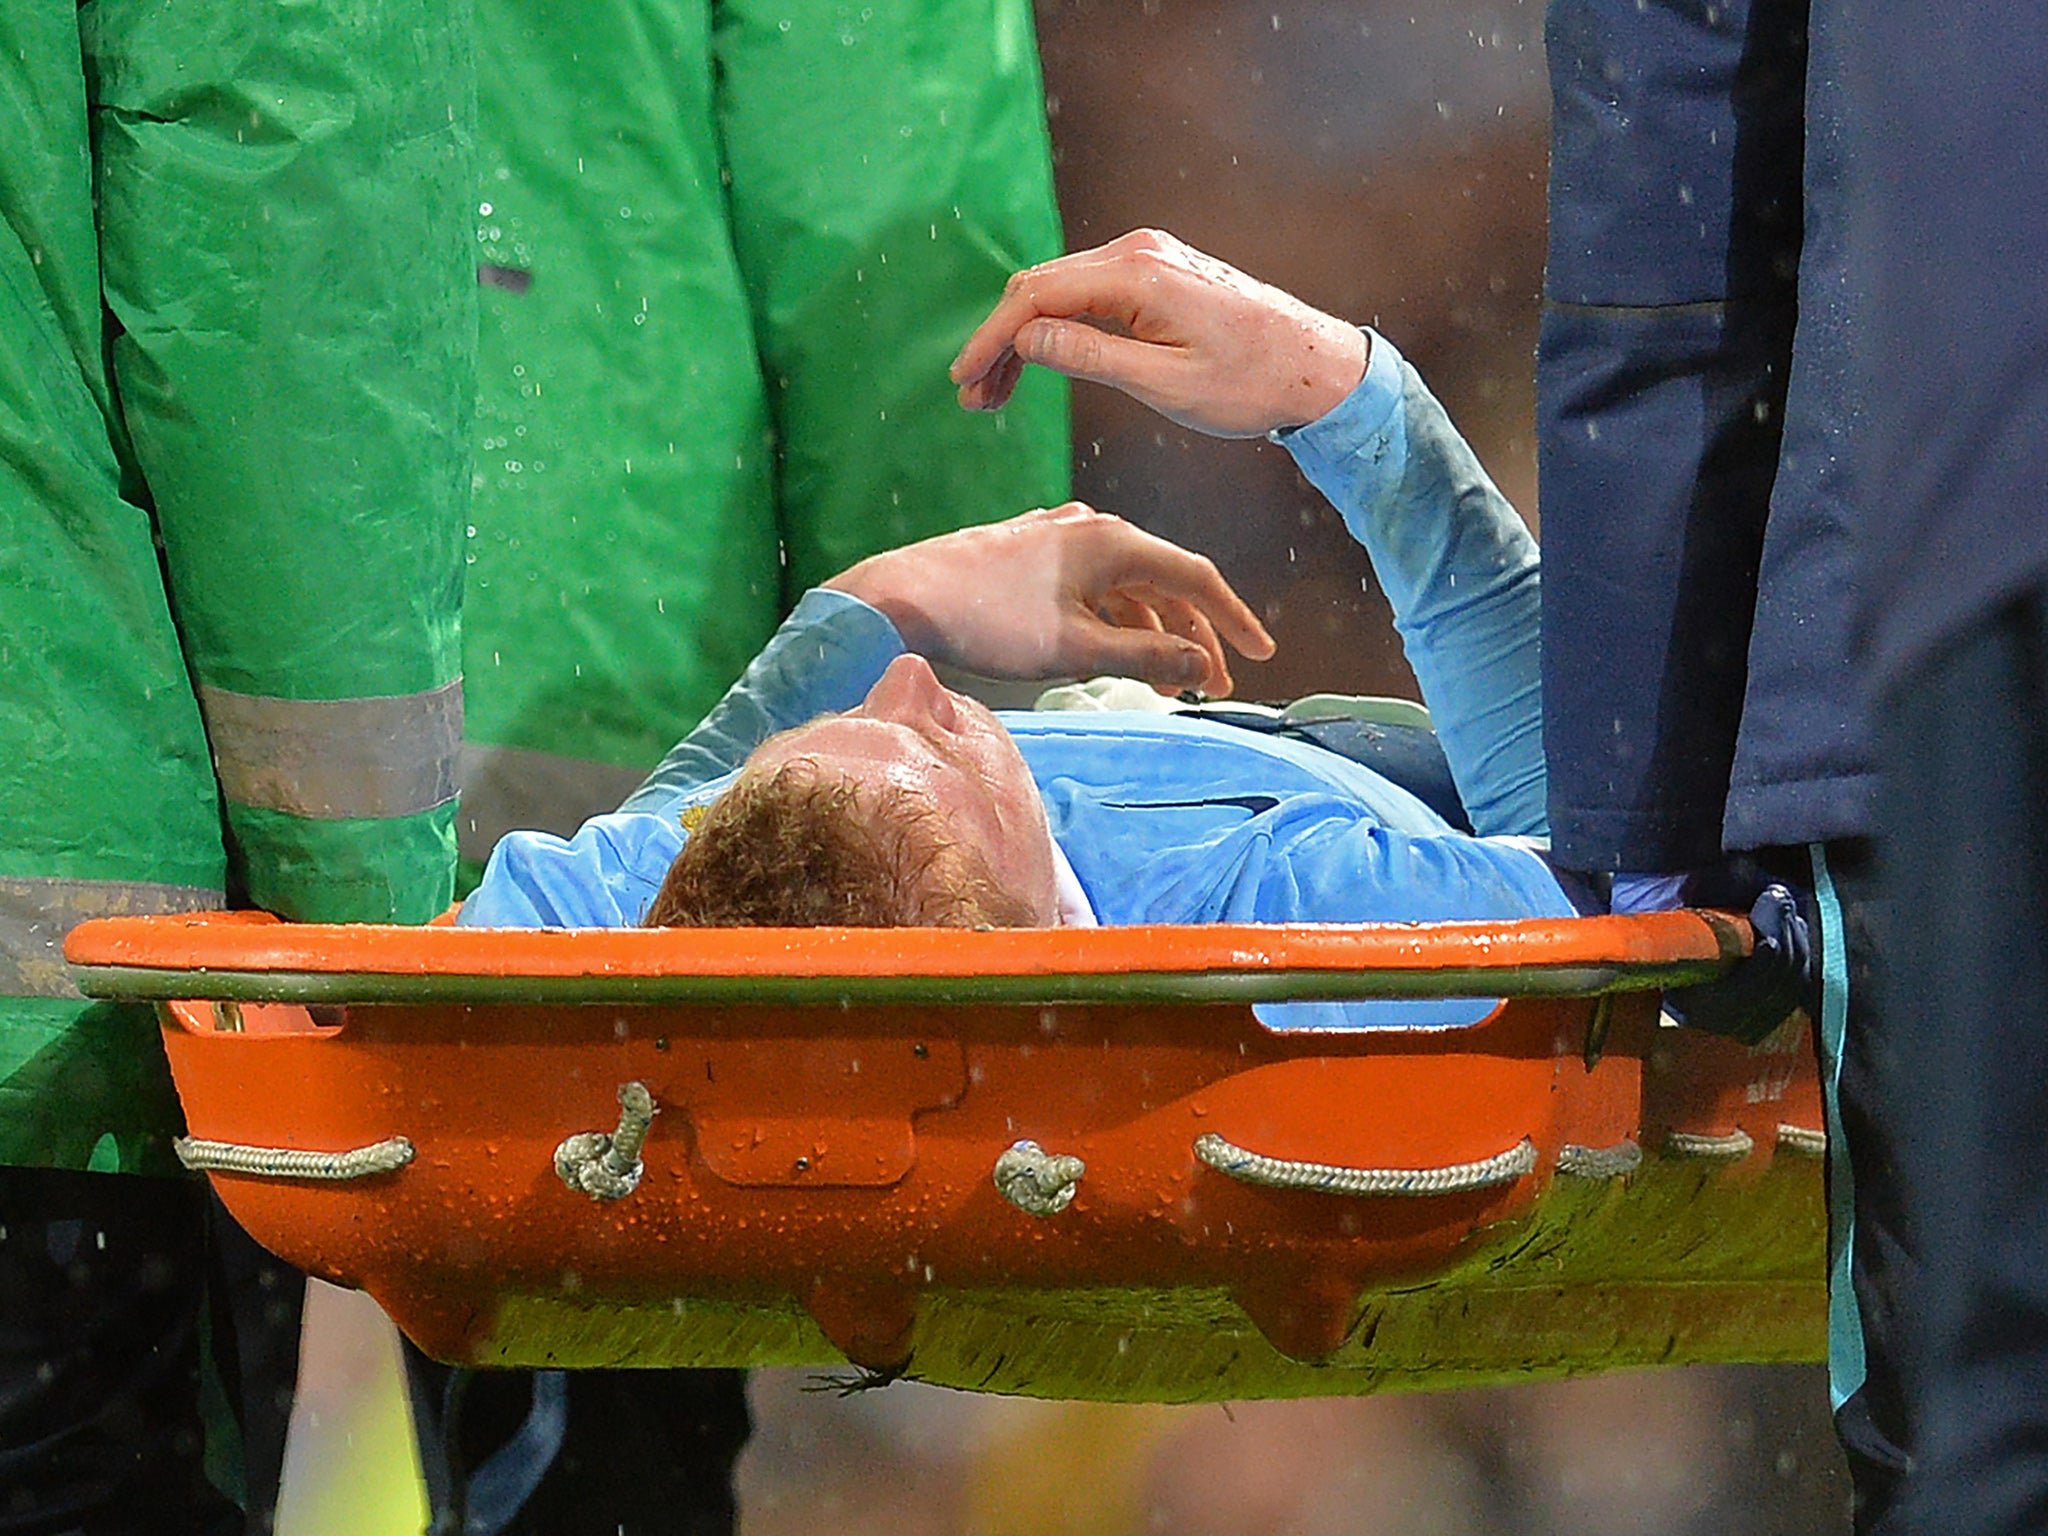 Kevin De Bruyne leaves the field on a stretcher